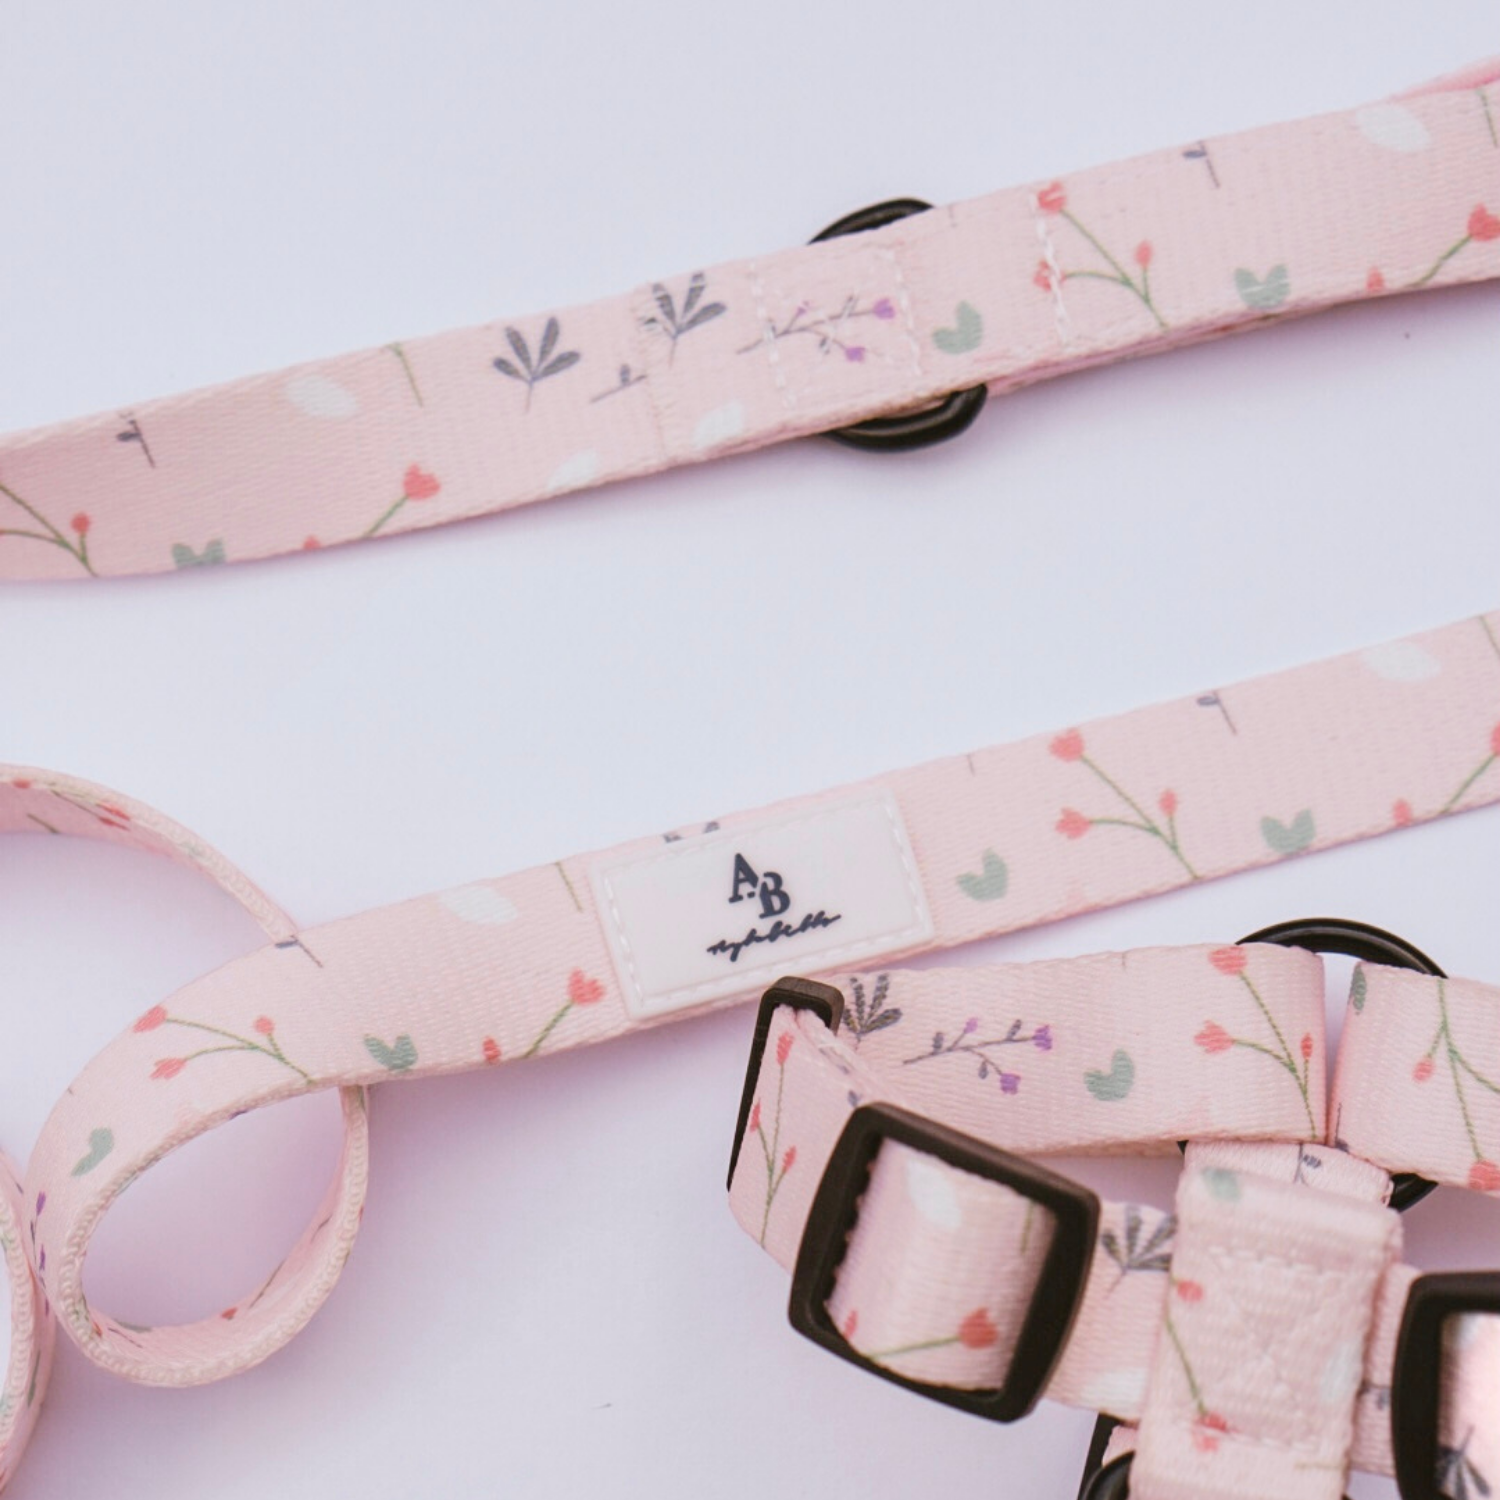 Aylabella Co. - Pink Blossom Leash - Dog Accessories (2 Sizes)